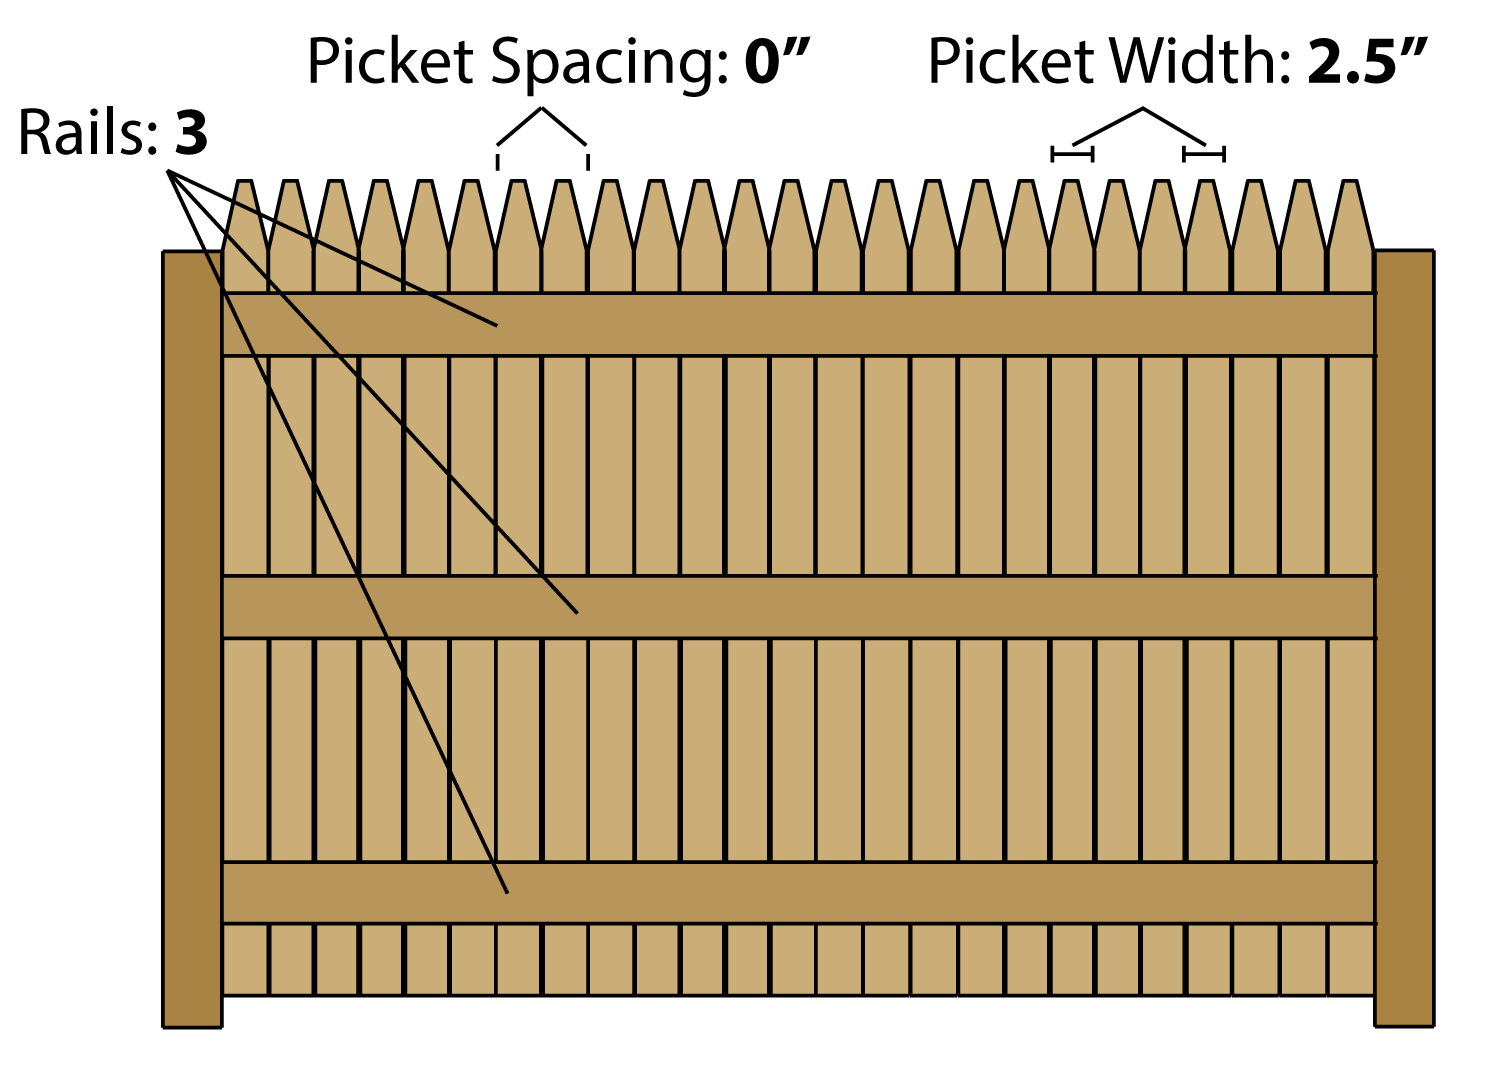 Illustration showing the design and lumber needed for a stockade fence